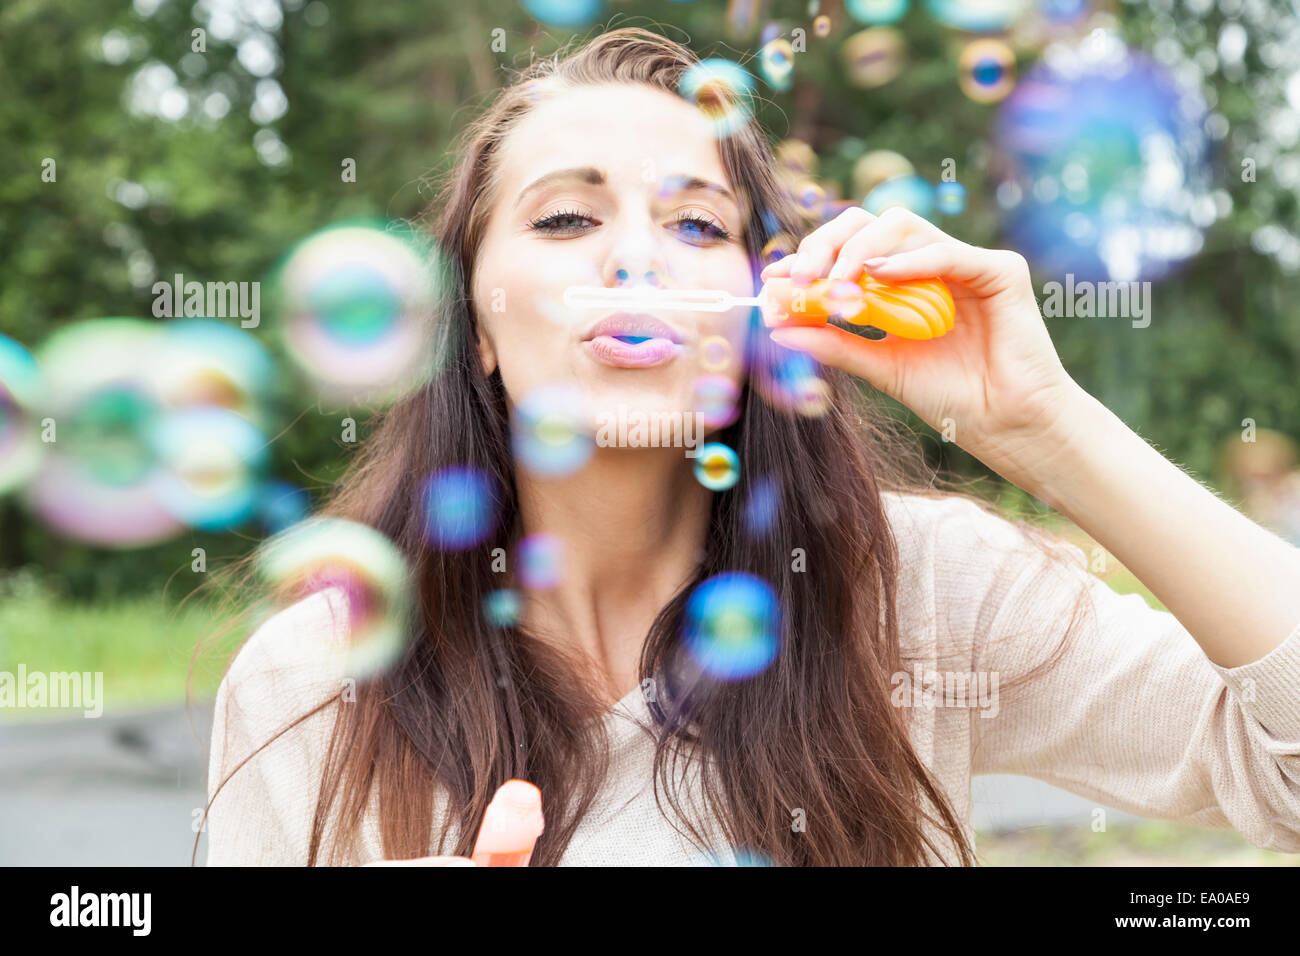 Young woman blowing bubbles Stock Photo